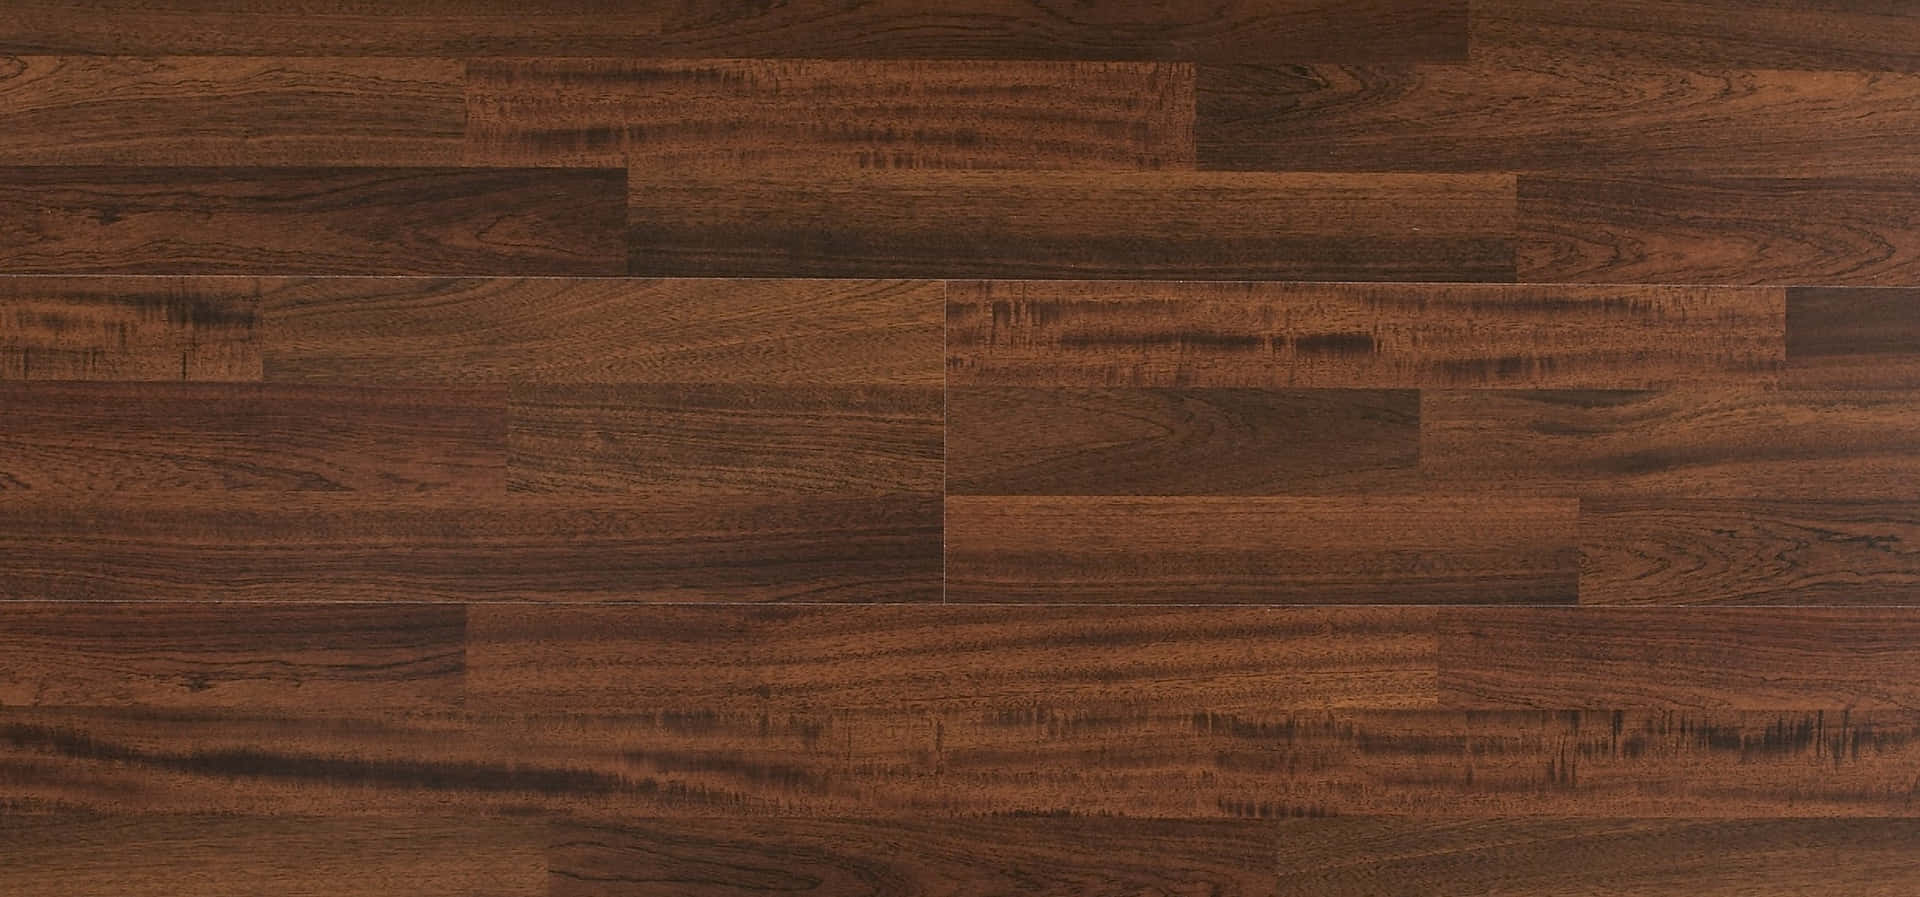 A Close Up View Of A Wooden Floor